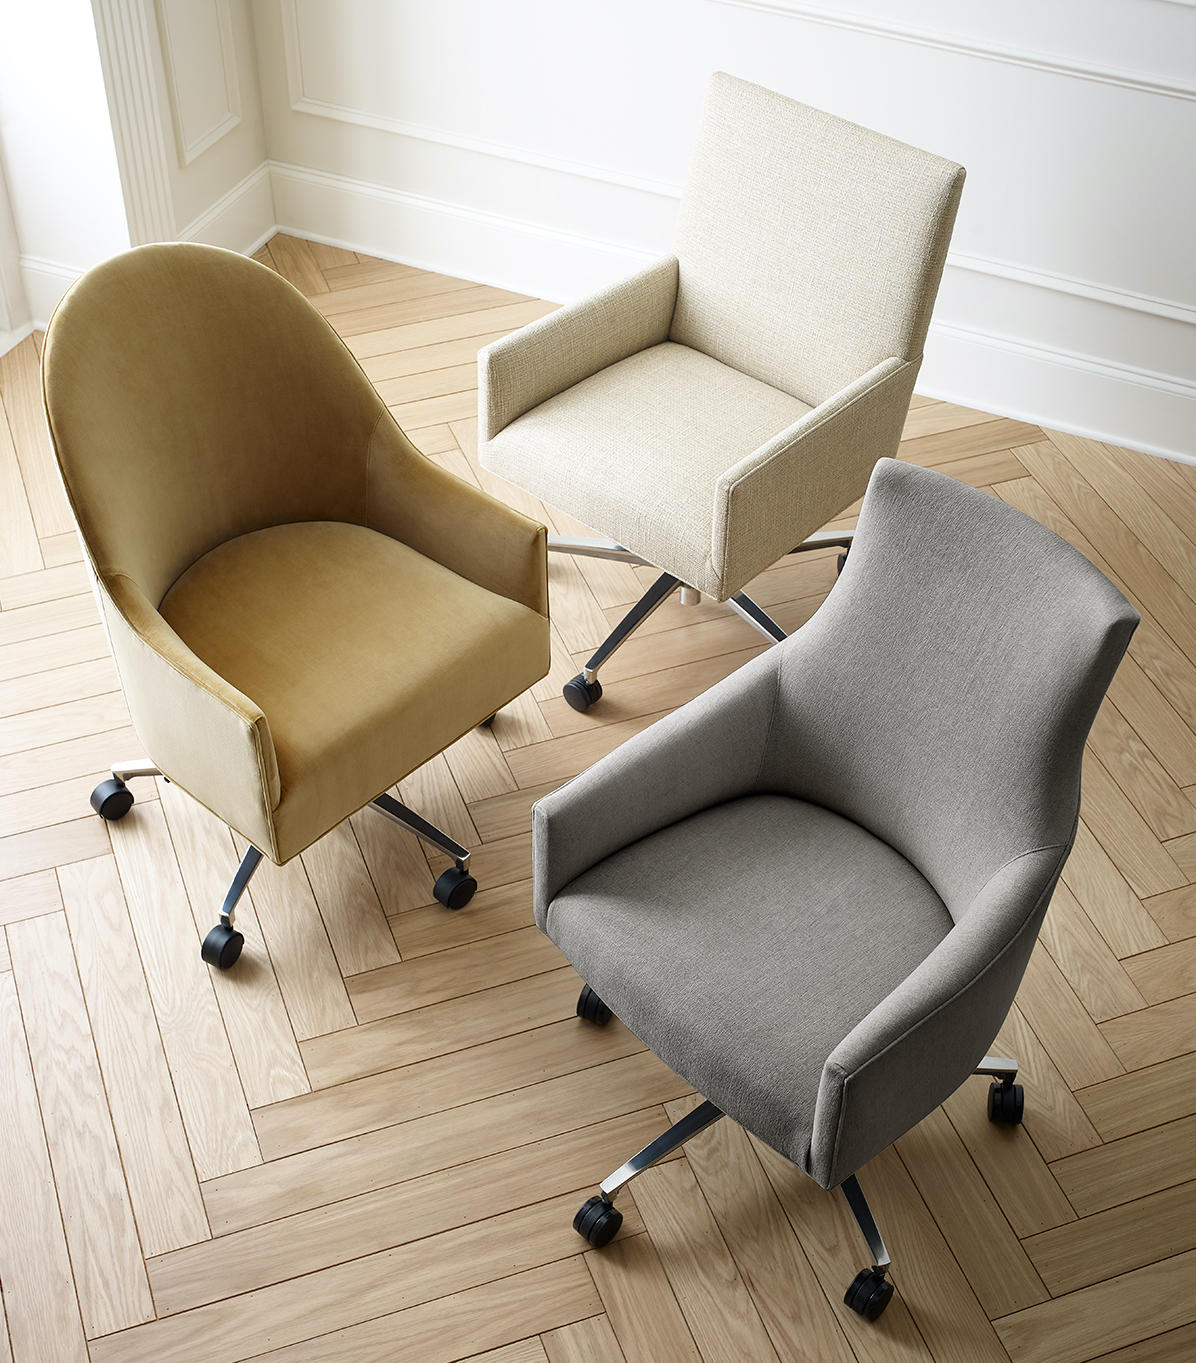 The Ada, Bella and Gage desk chairs from Mitchell Gold + Bob Williams